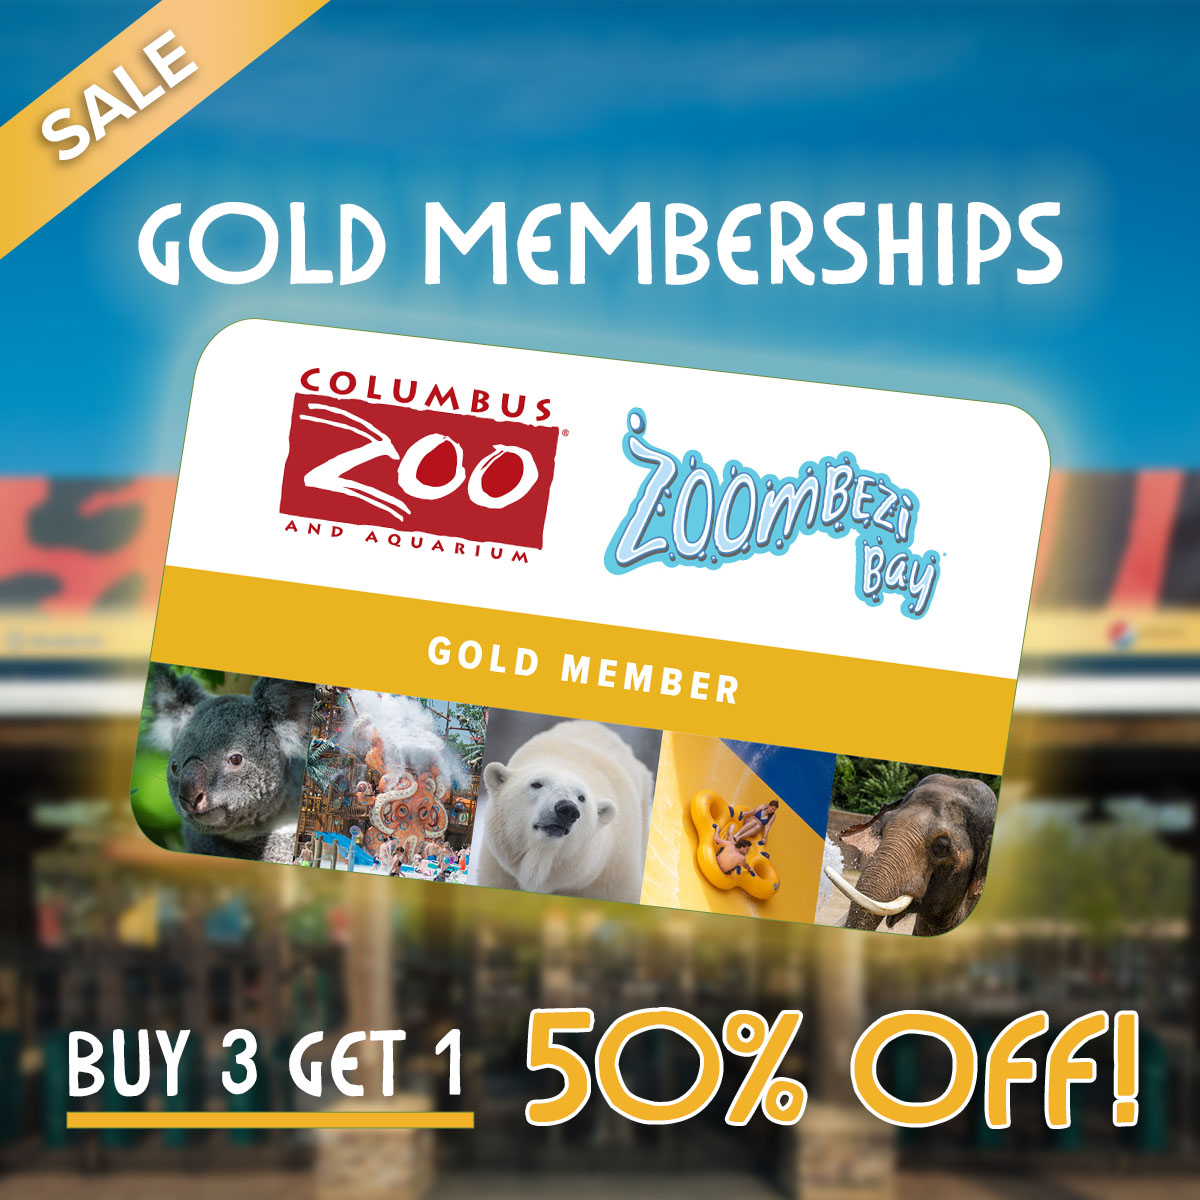 NOW through May 17, guests can purchase three gold memberships and receive one 50% off! Learn more at columbuszoo.org/membership